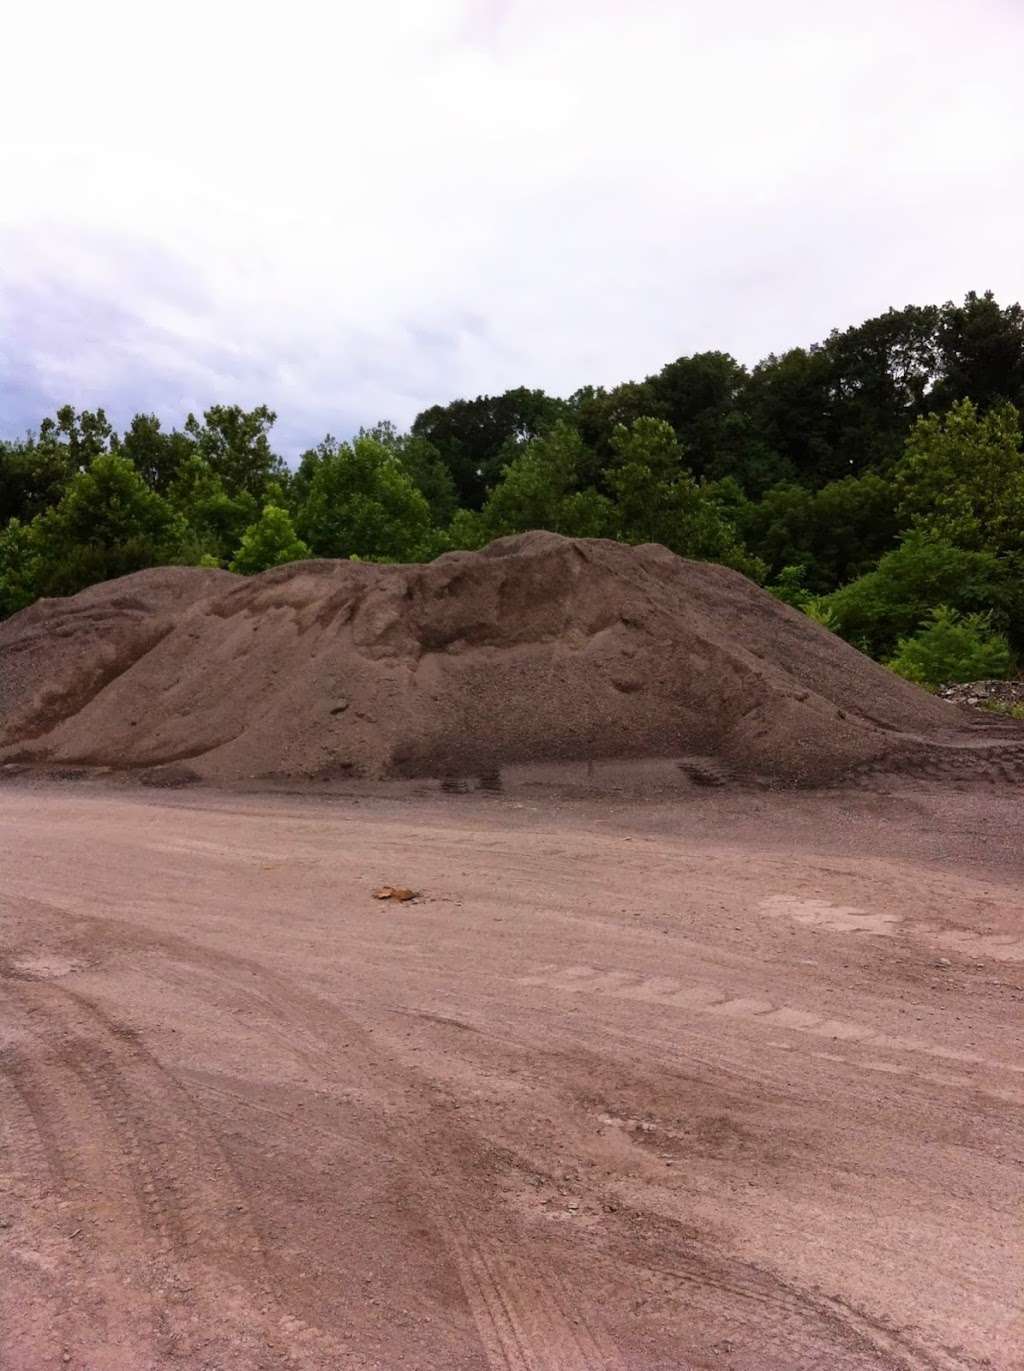 Total Recycling Quarry: Crushed Concrete Blacktop Millings Slag  | 1820 N Dauphin St, Allentown, PA 18109, USA | Phone: (610) 266-0907